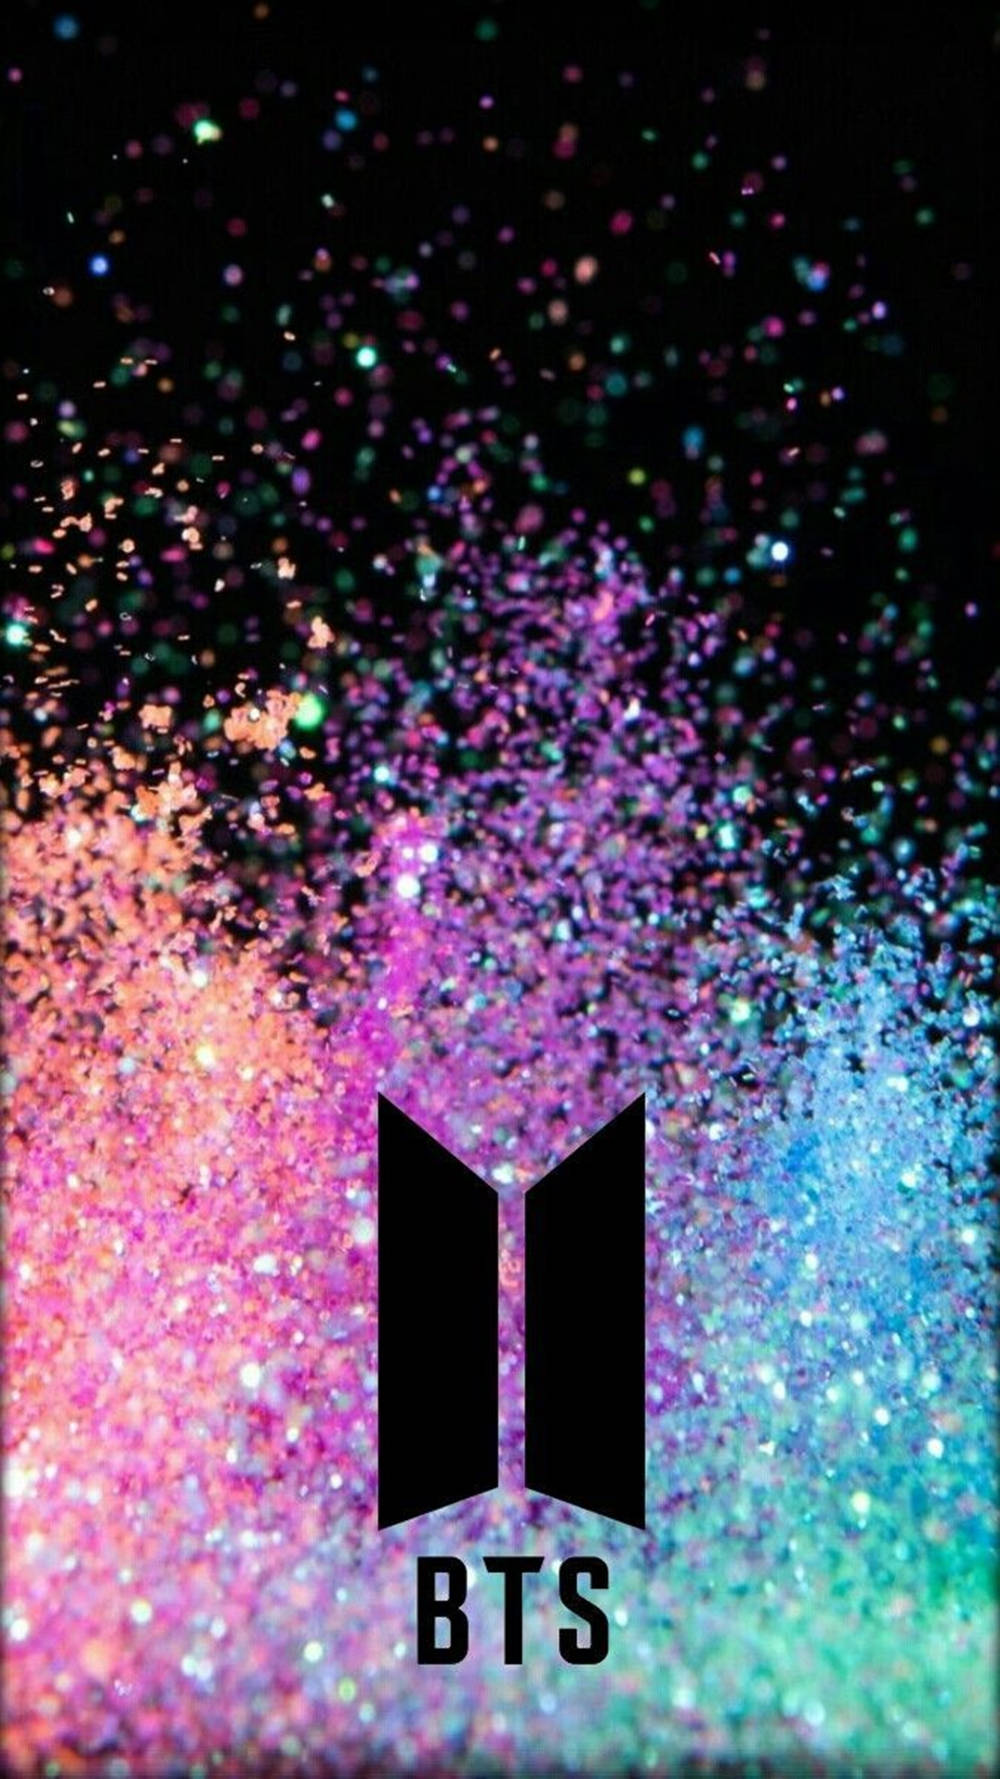 Stylish Poster For Bts Phone Wallpaper